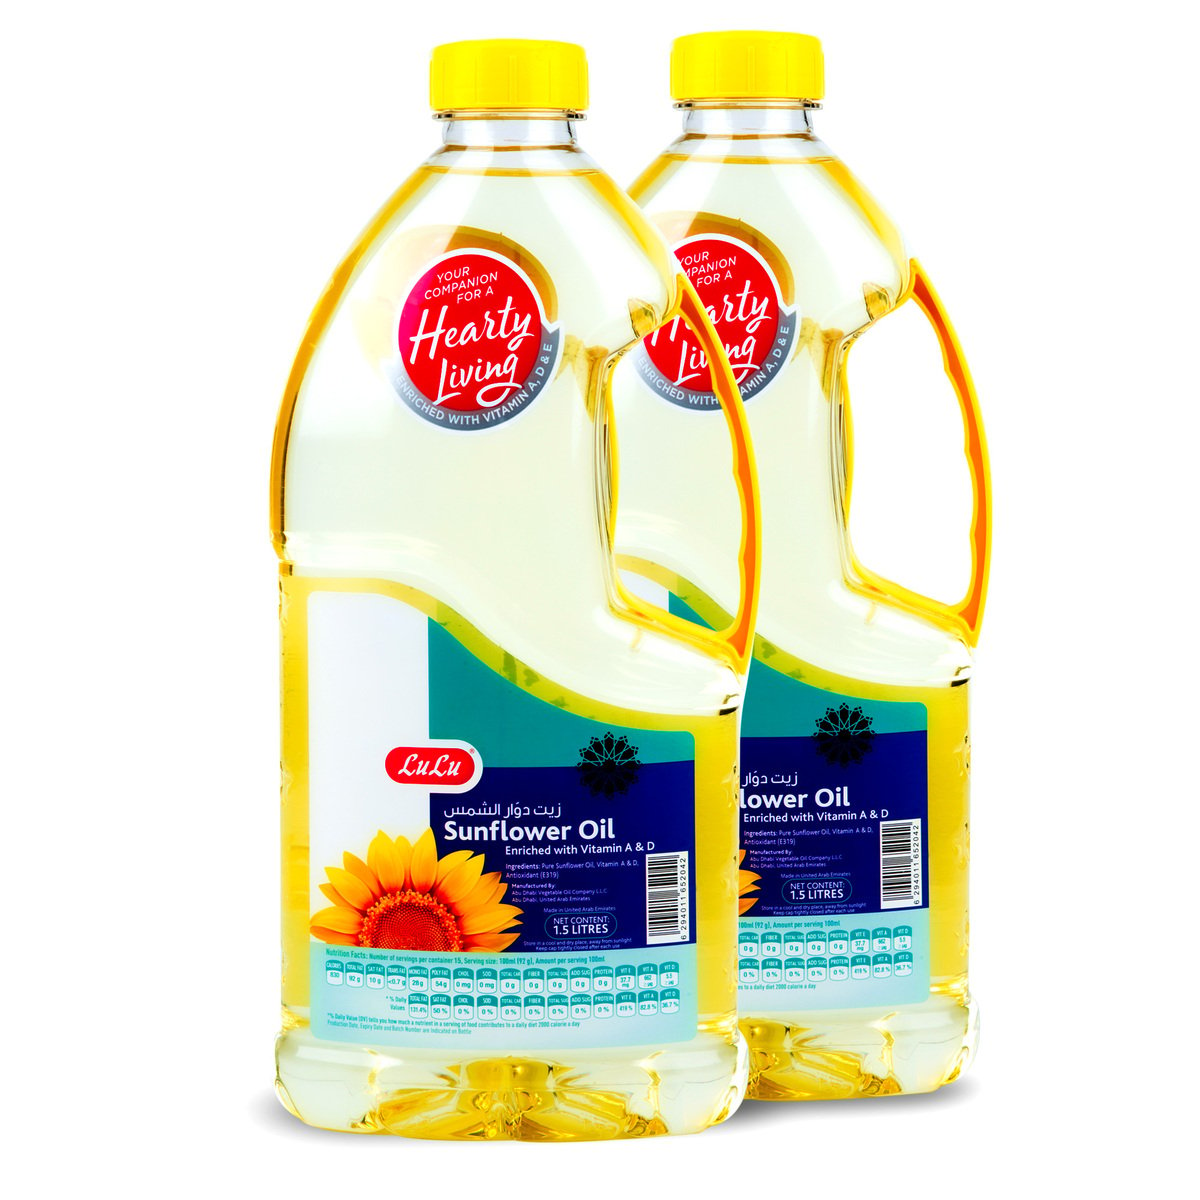 Buy LuLu Pure Sunflower Oil 2 x 1.5 Litres Online at Best Price | Sunflower Oil | Lulu Kuwait in Kuwait